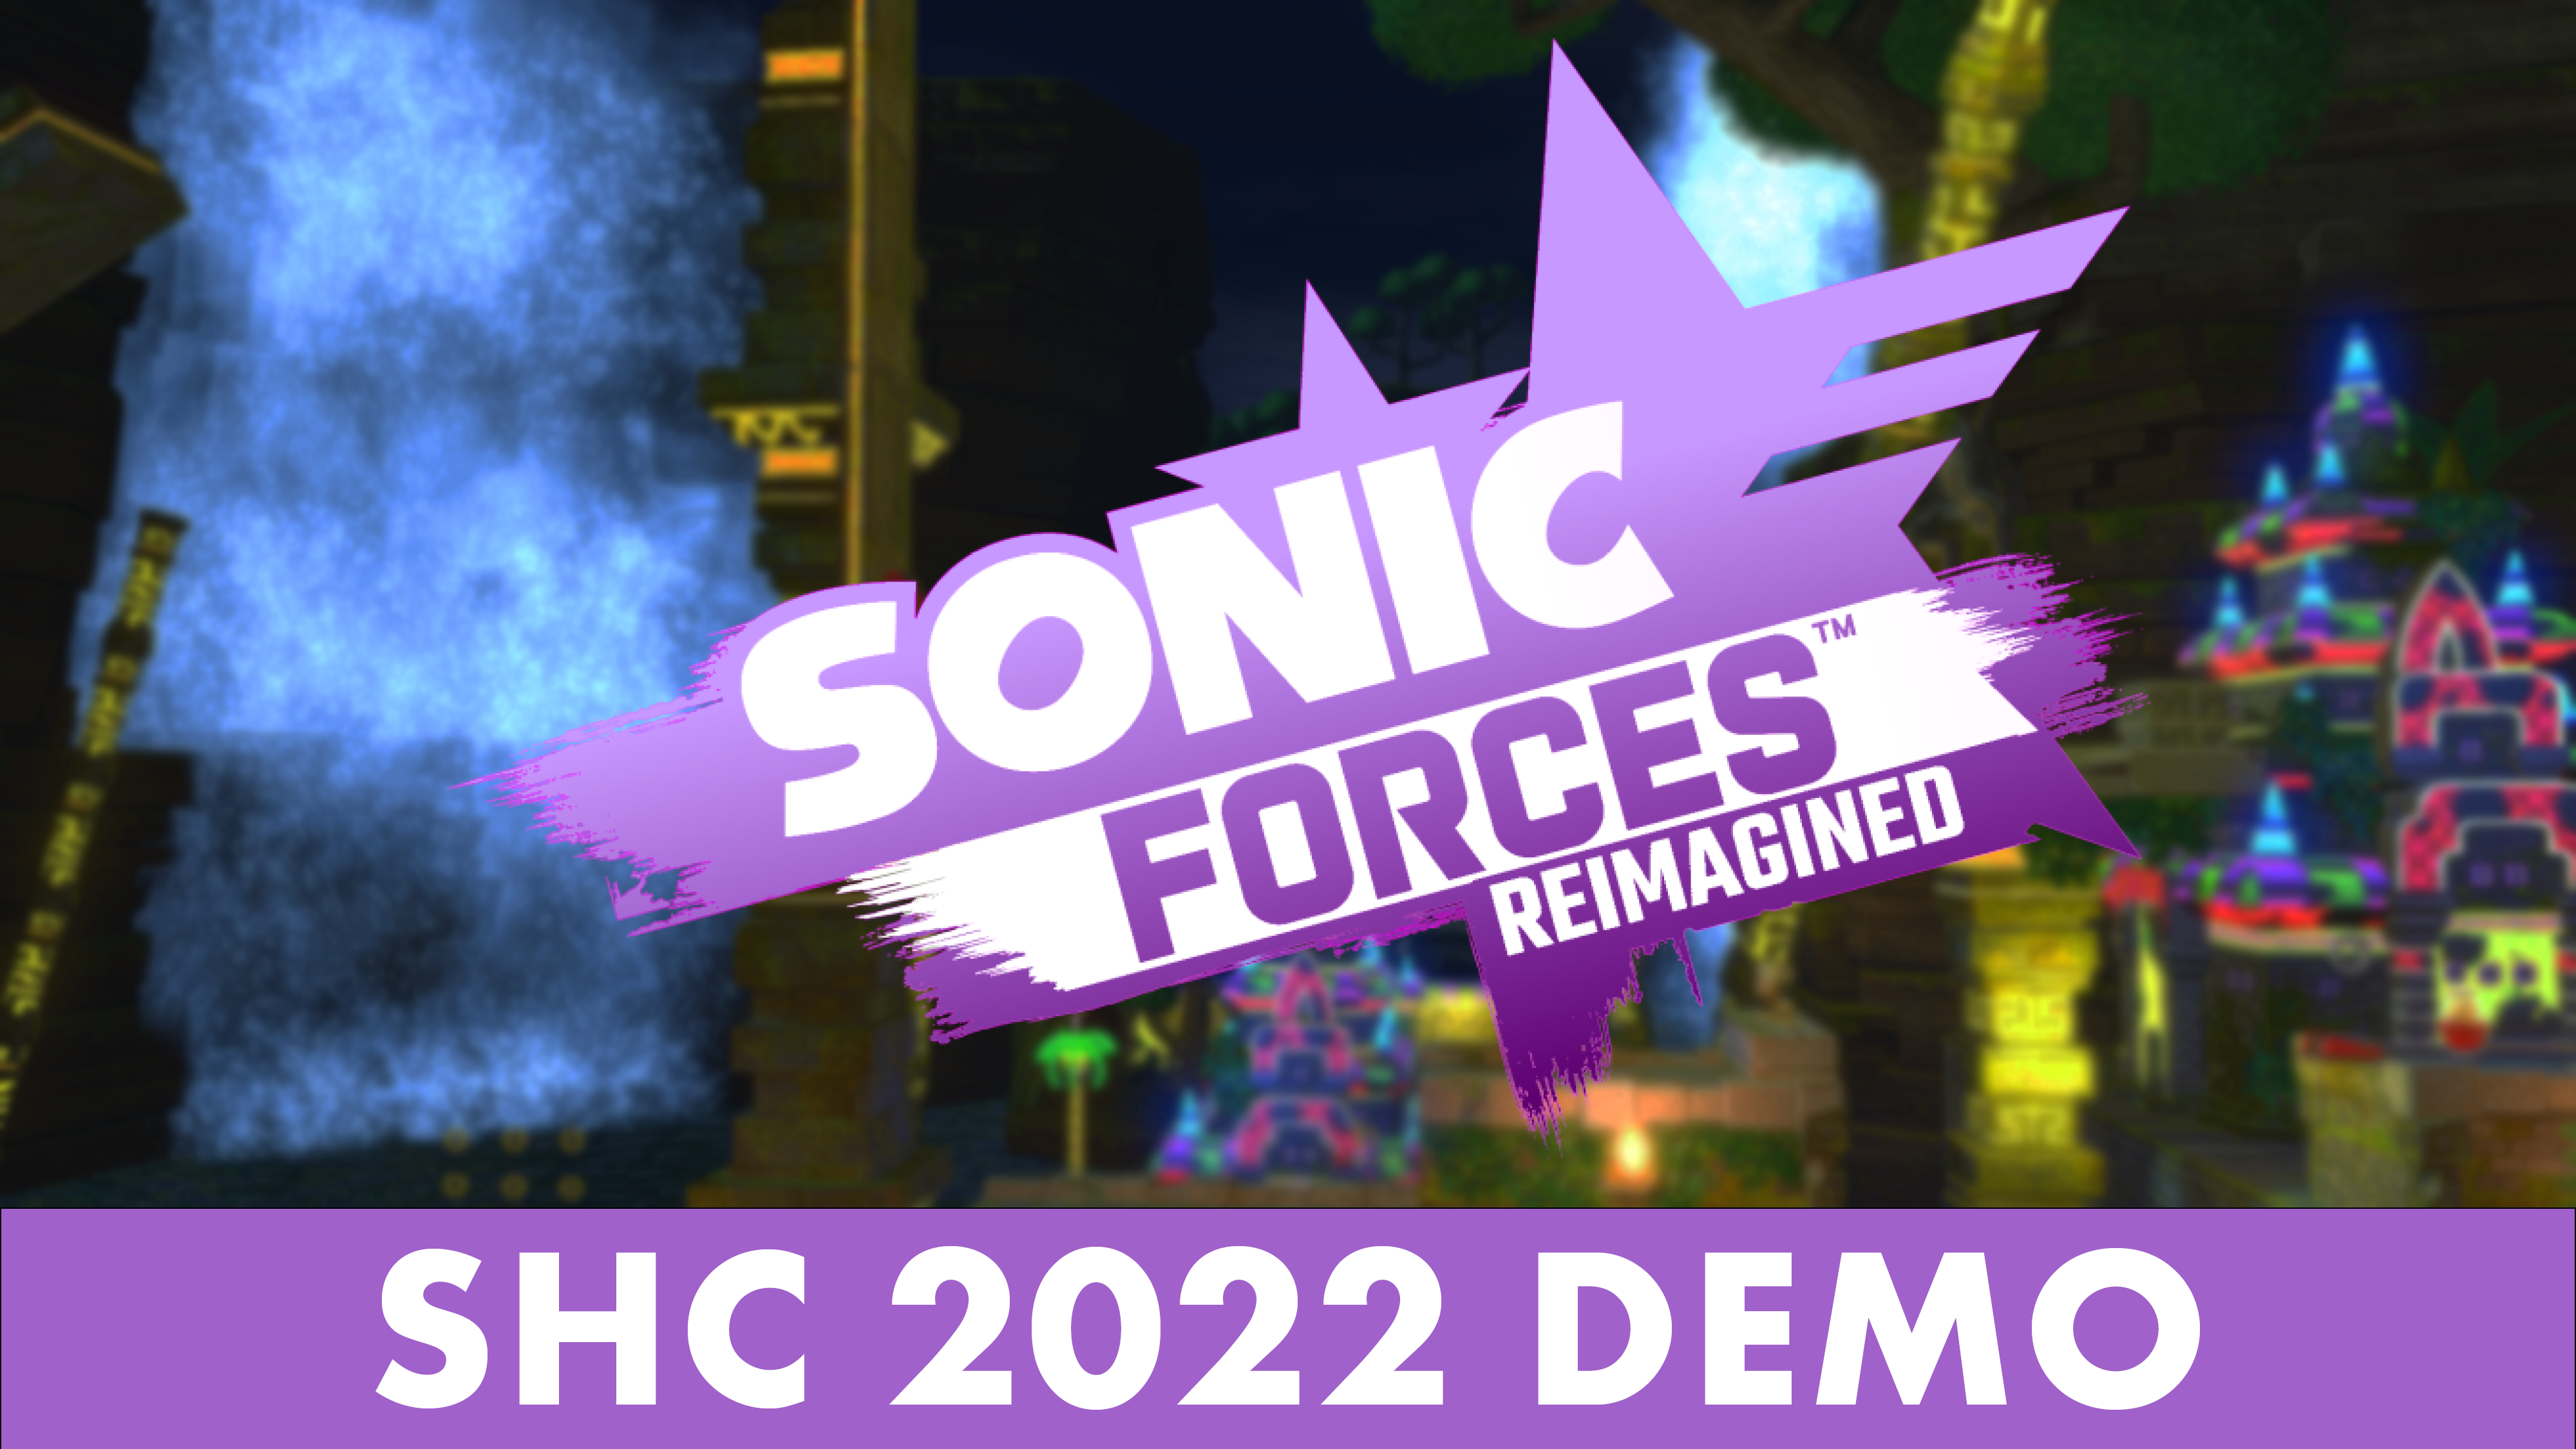 Sonic Hacking Contest :: The SHC2022 Contest :: Sonic 3 A.I.R.: D.A. Garden  Edition :: By Thorn & D.A. Garden